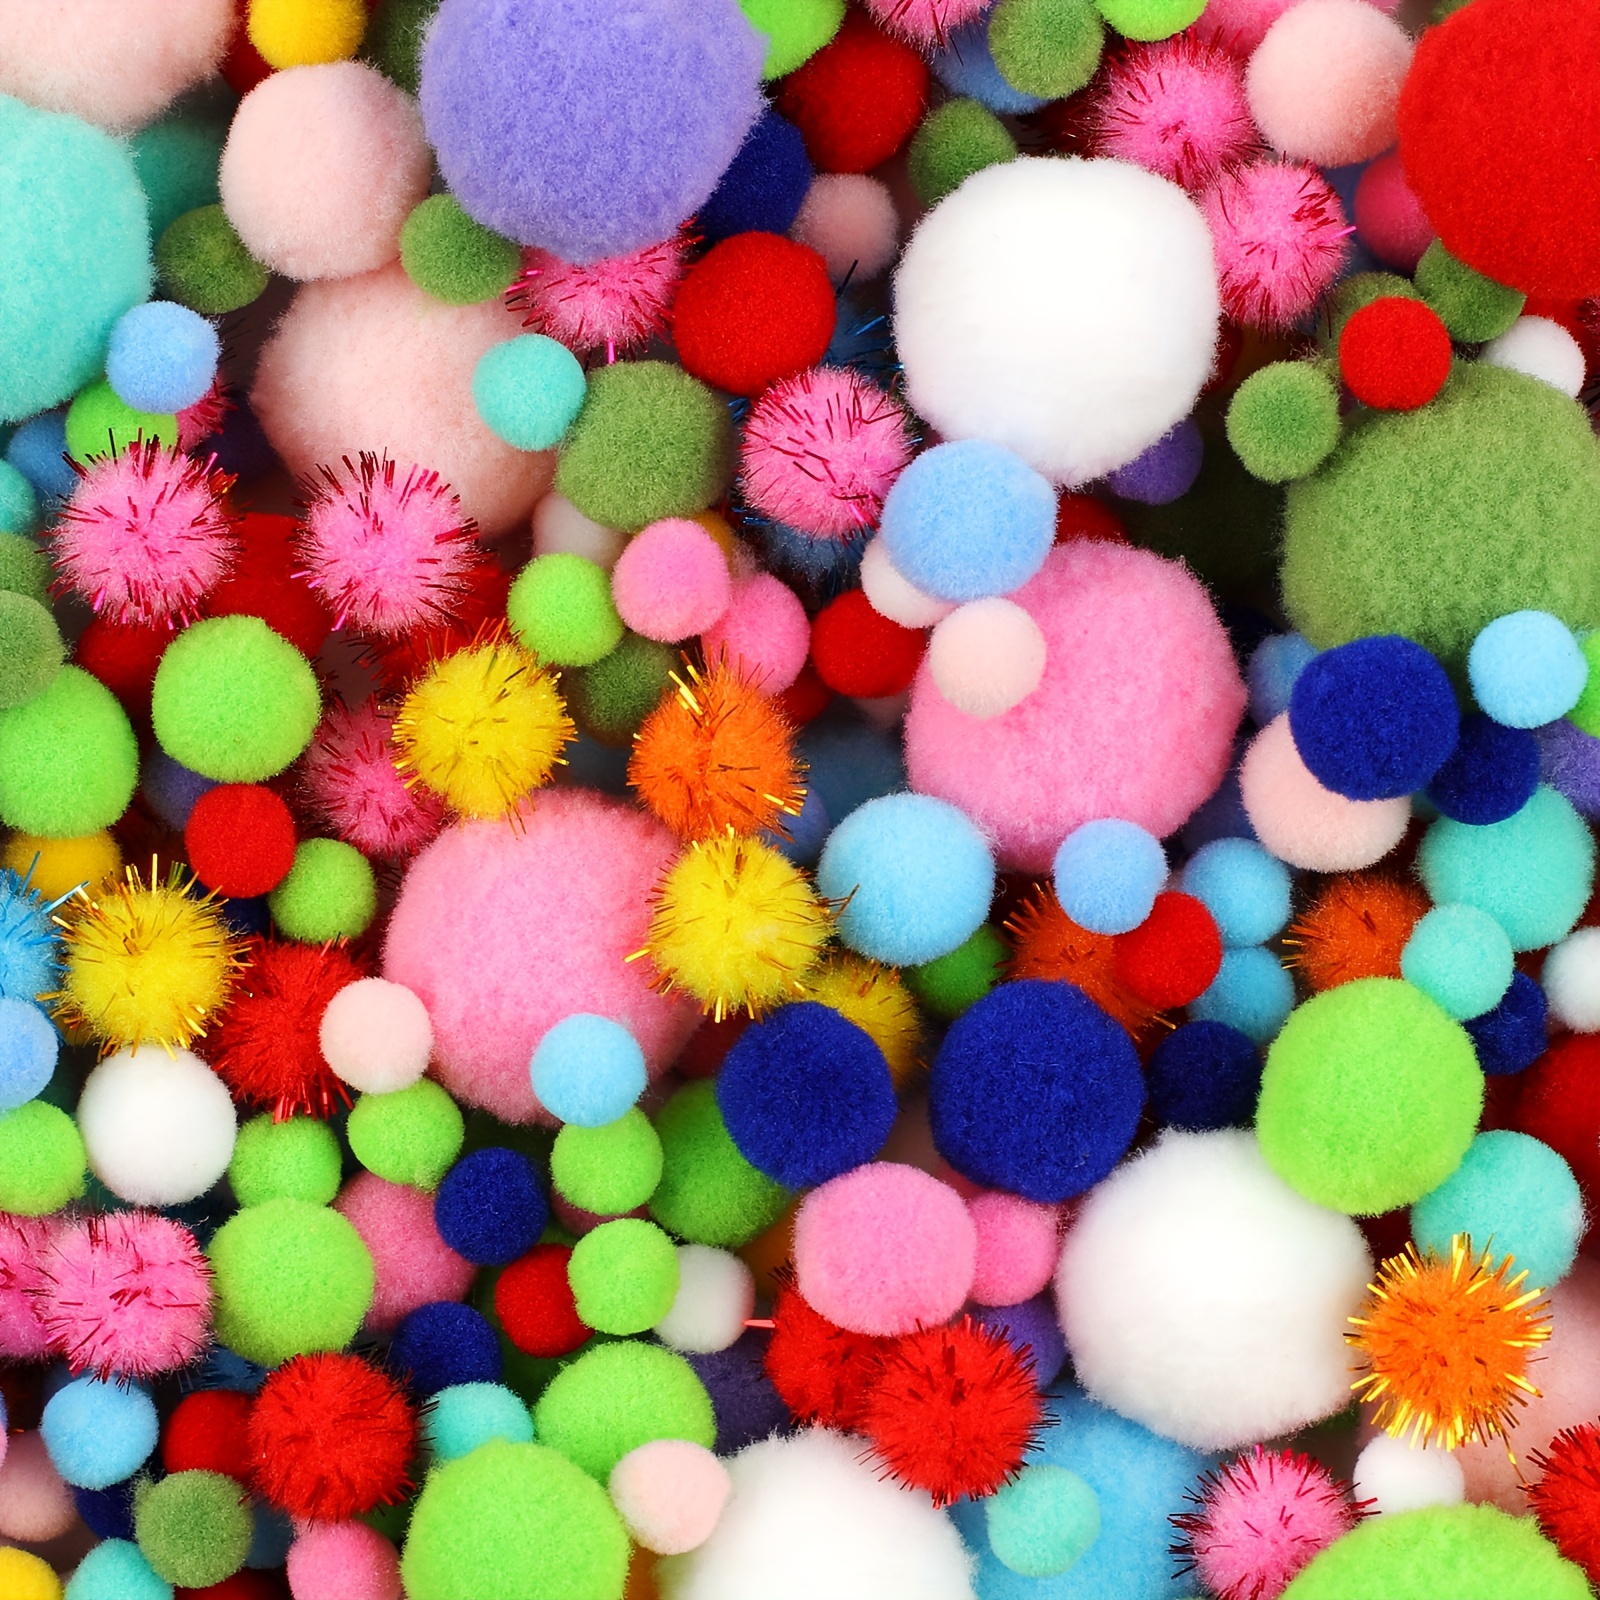 900pcs Pom Poms, Multicolored Bulk Pom Poms For Arts And Crafts, For Arts  And Craft Making Decoration, Shop The Latest Trends